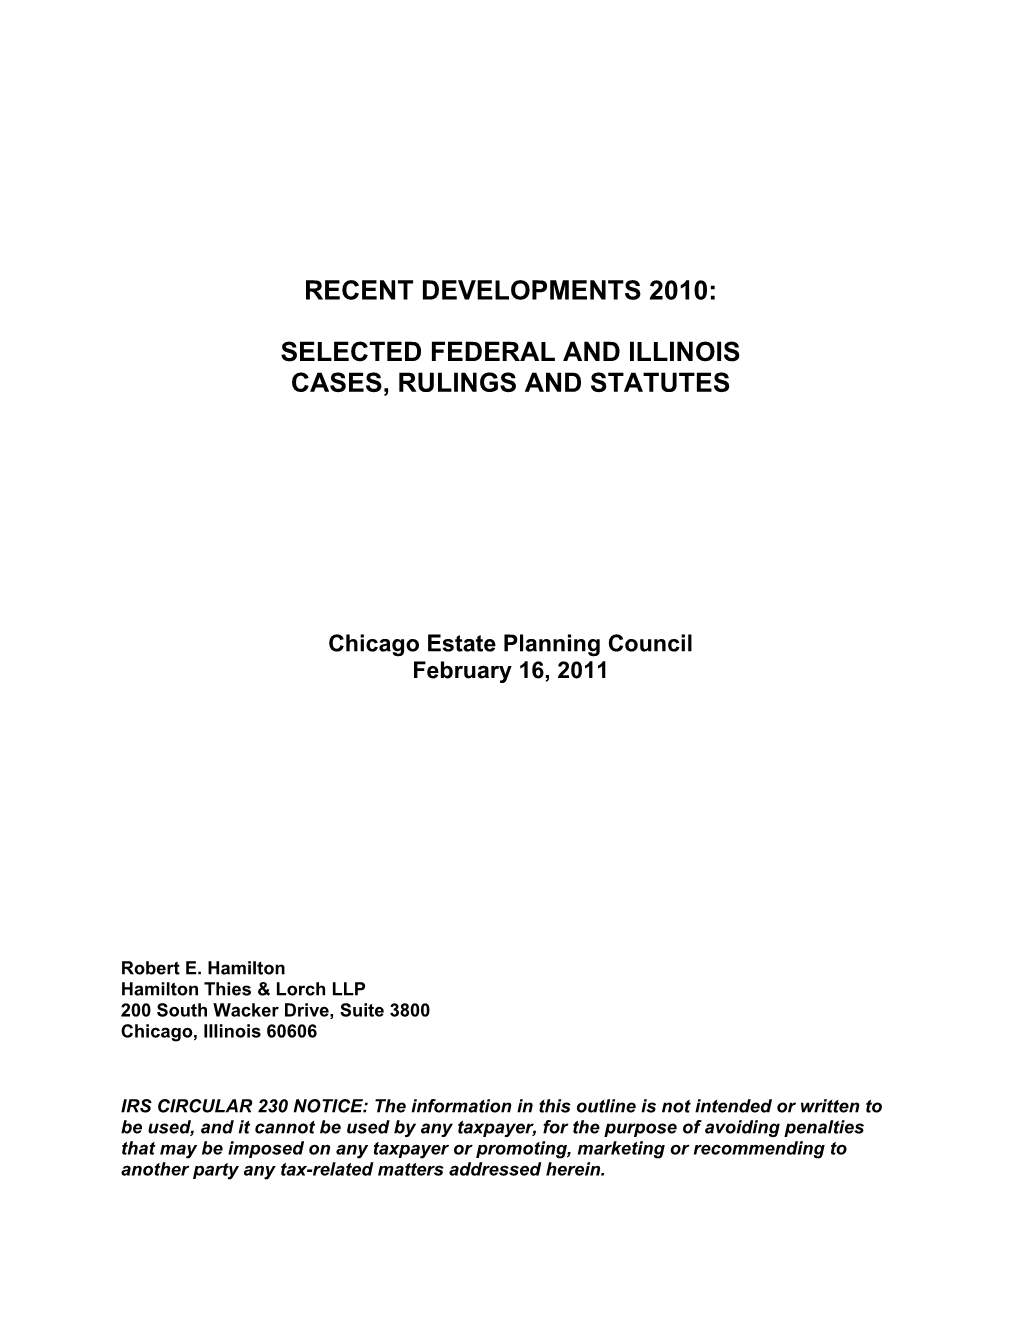 Selected Federal and Illinois s1